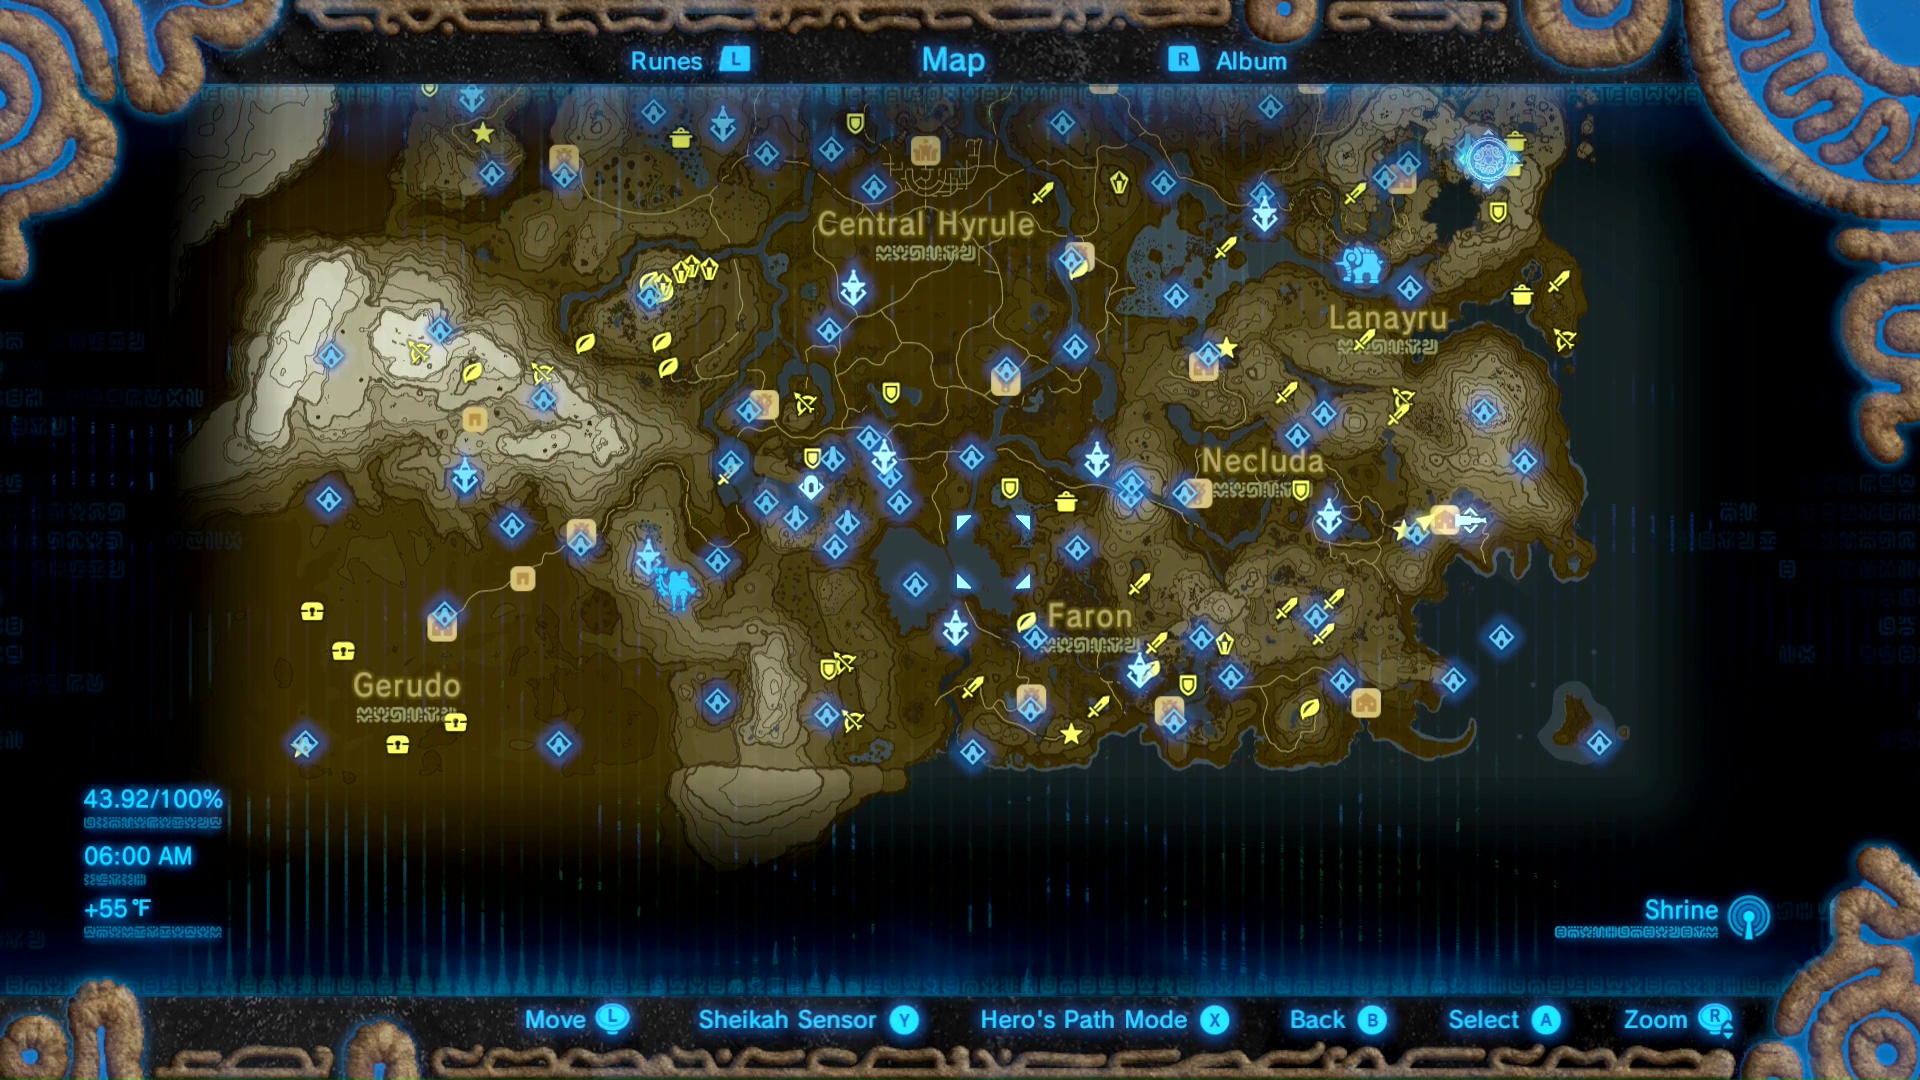 Legend Of Zelda Breath Of The Wild Armor Map South Aug 2019 